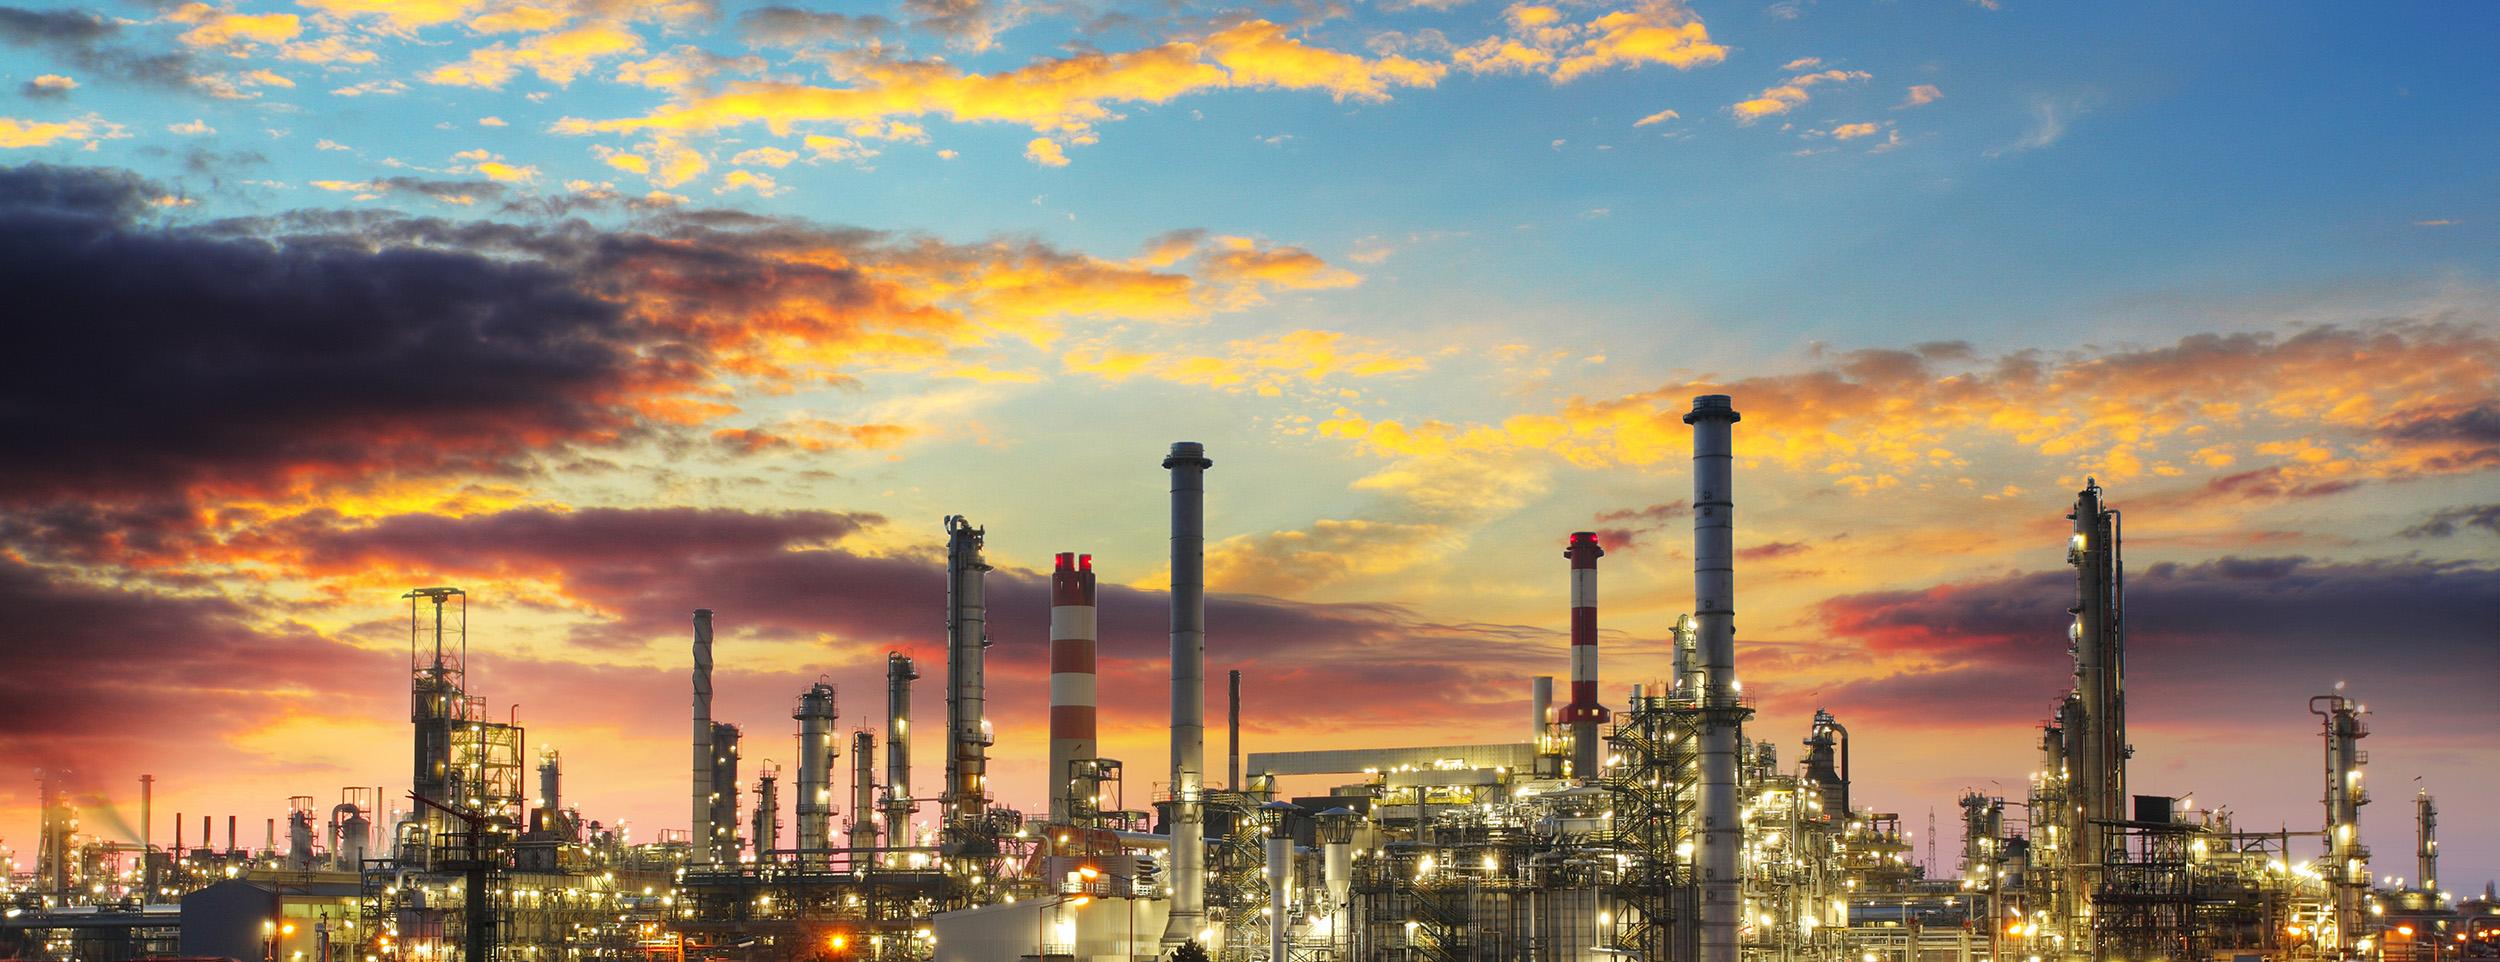 Refineries and Chemicals